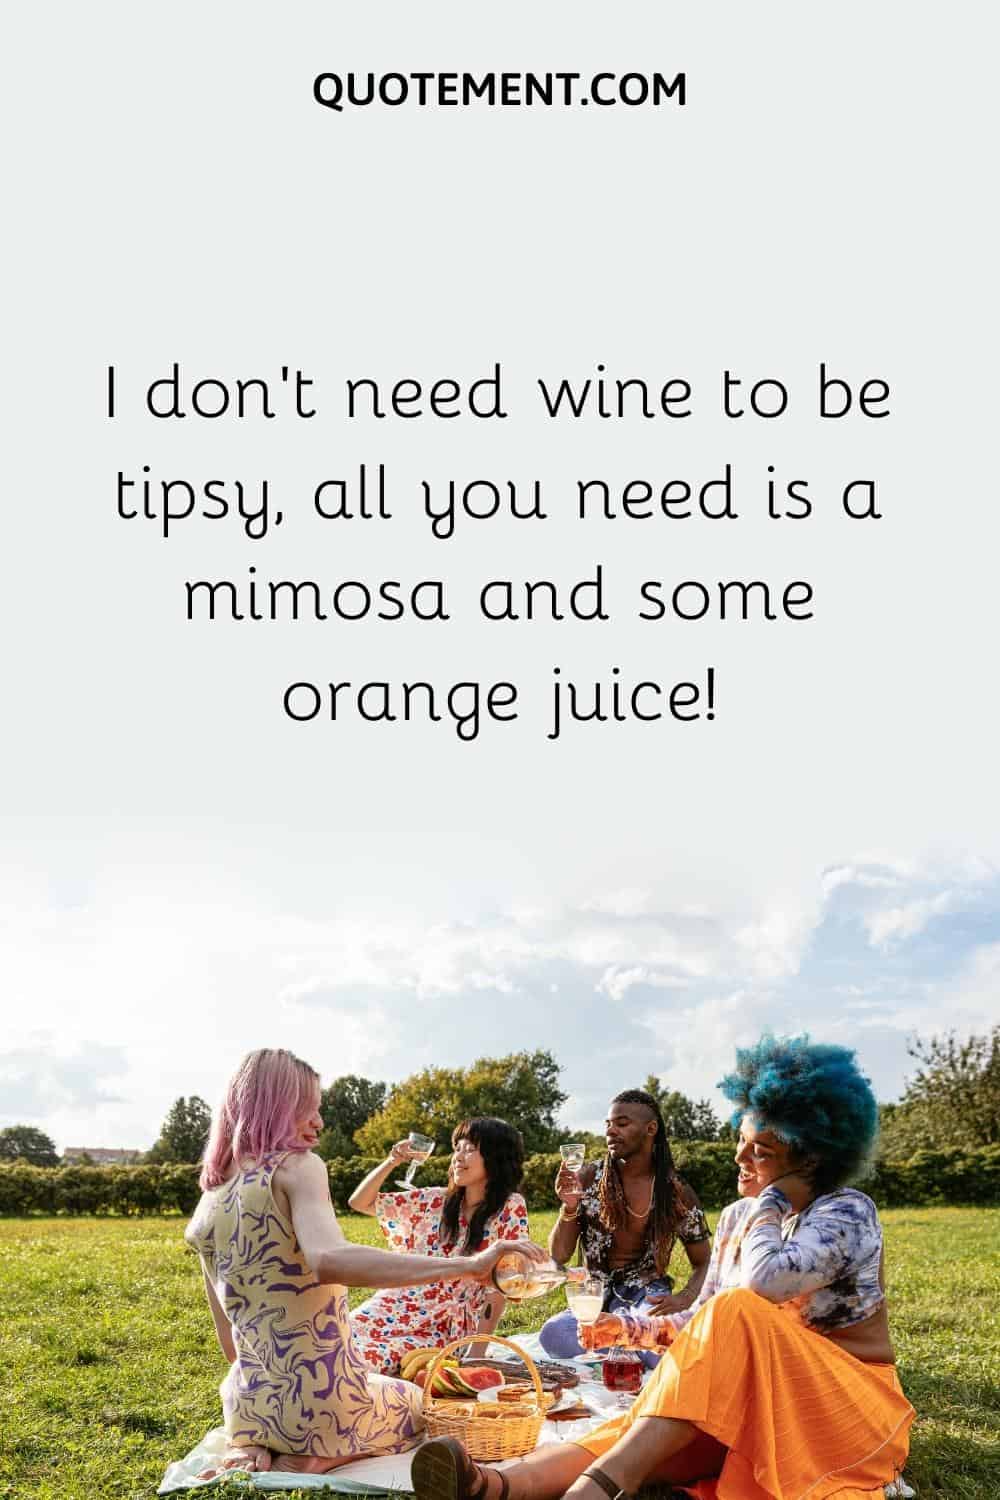 I don't need wine to be tipsy, all you need is a mimosa and some orange juice!